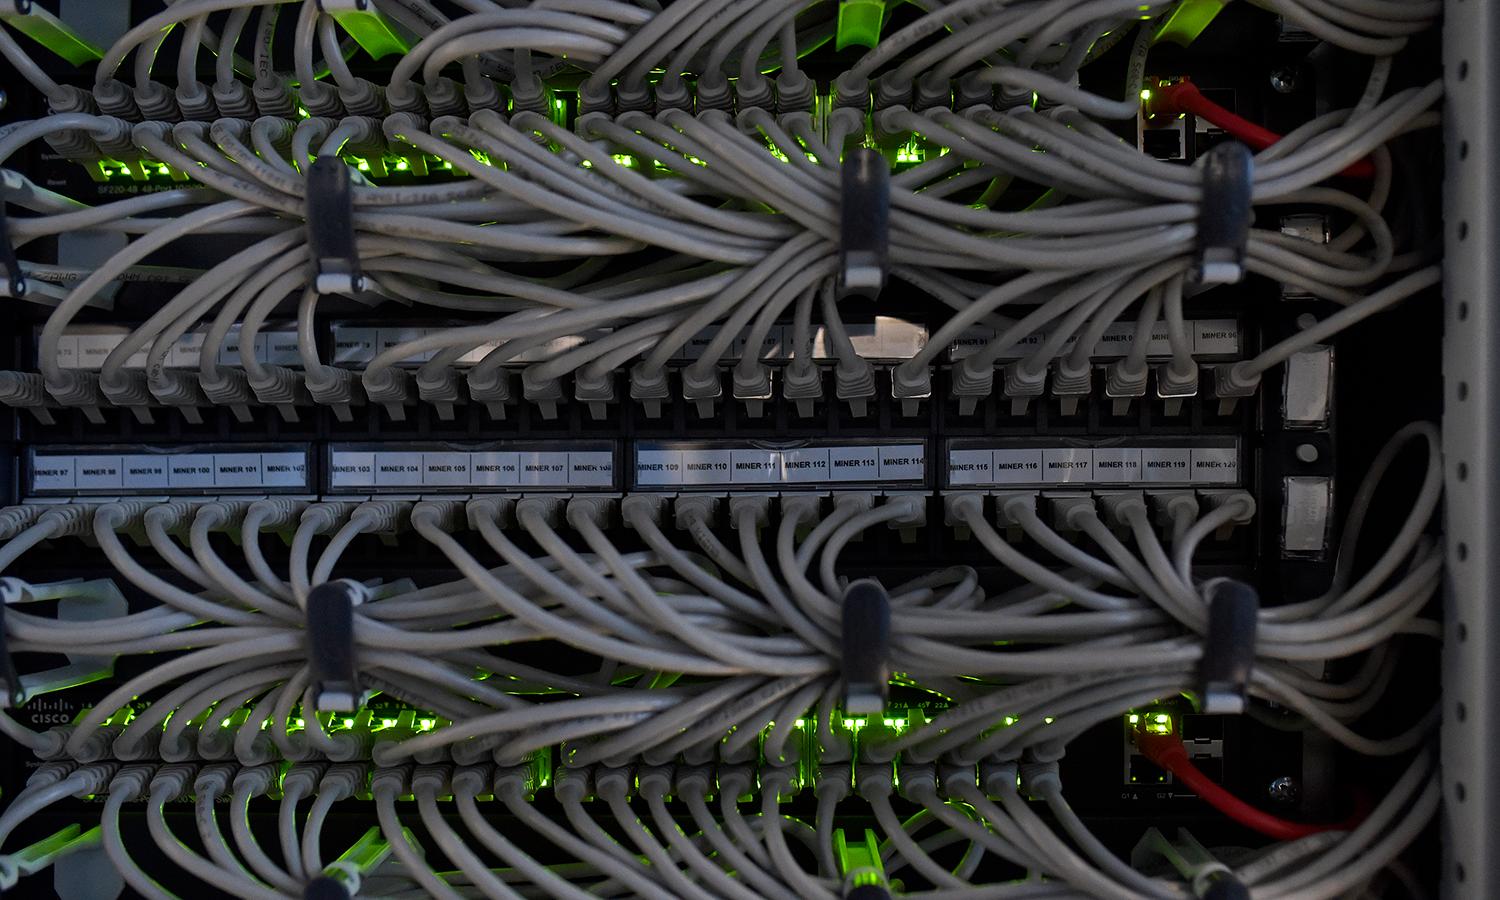 A technical system engineer and hardware asset manager performs control-and-maintenance operations of a cryptomining farm installed inside a hydroelectric power plant on Feb. 2, 2022, in Bolzano, Italy. (Photo by Alessio Coser/Getty Images)